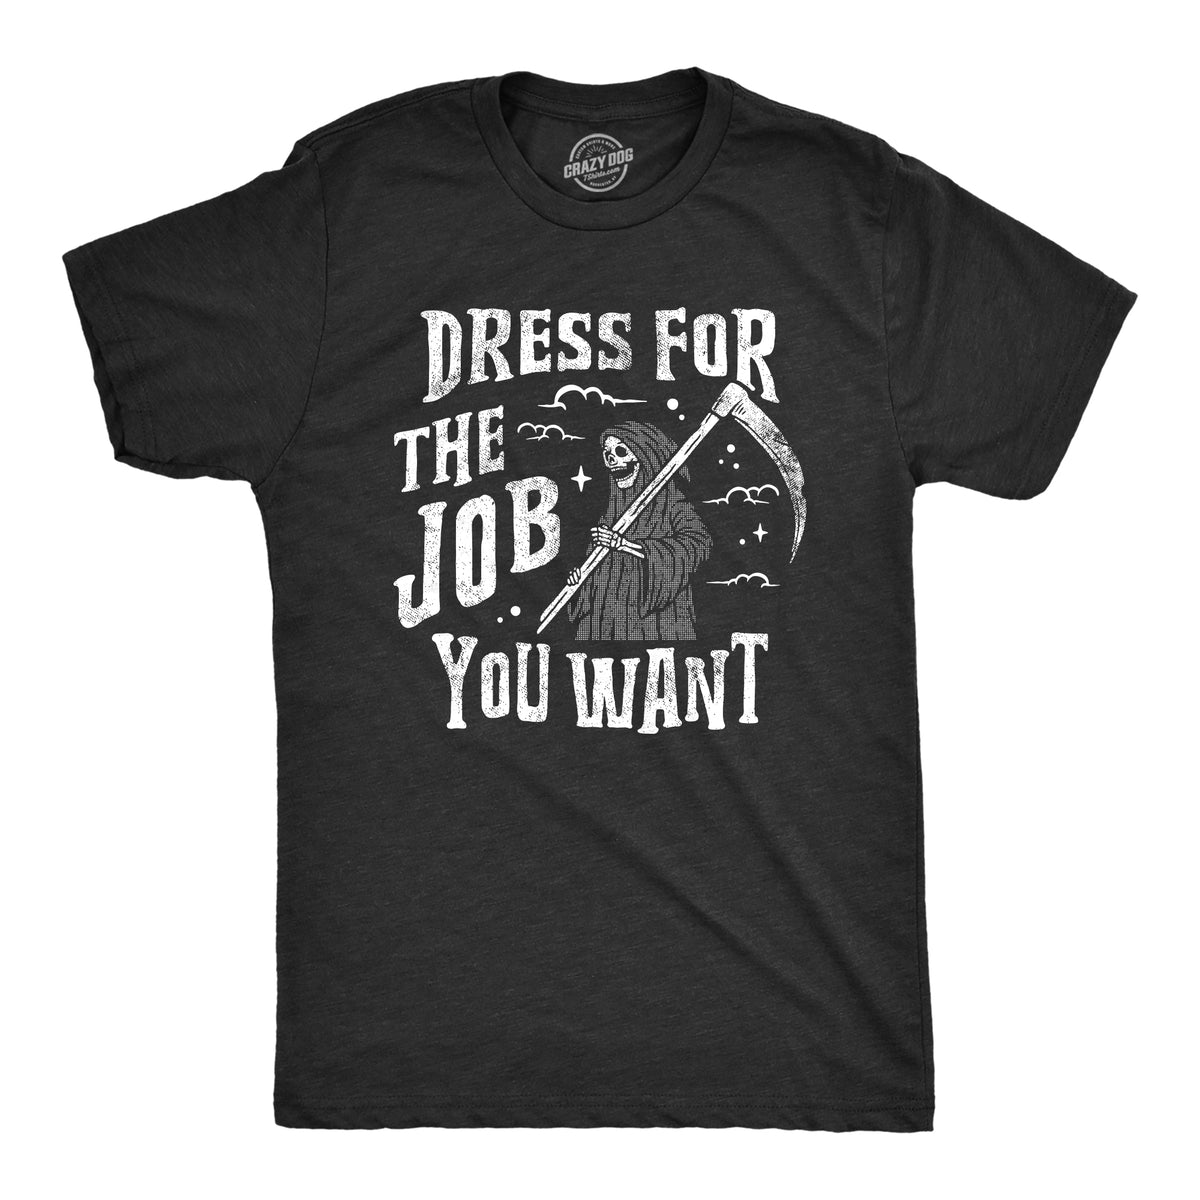 Funny Heather Black - JOB Dress For The Job You Want Mens T Shirt Nerdy Office Sarcastic Tee